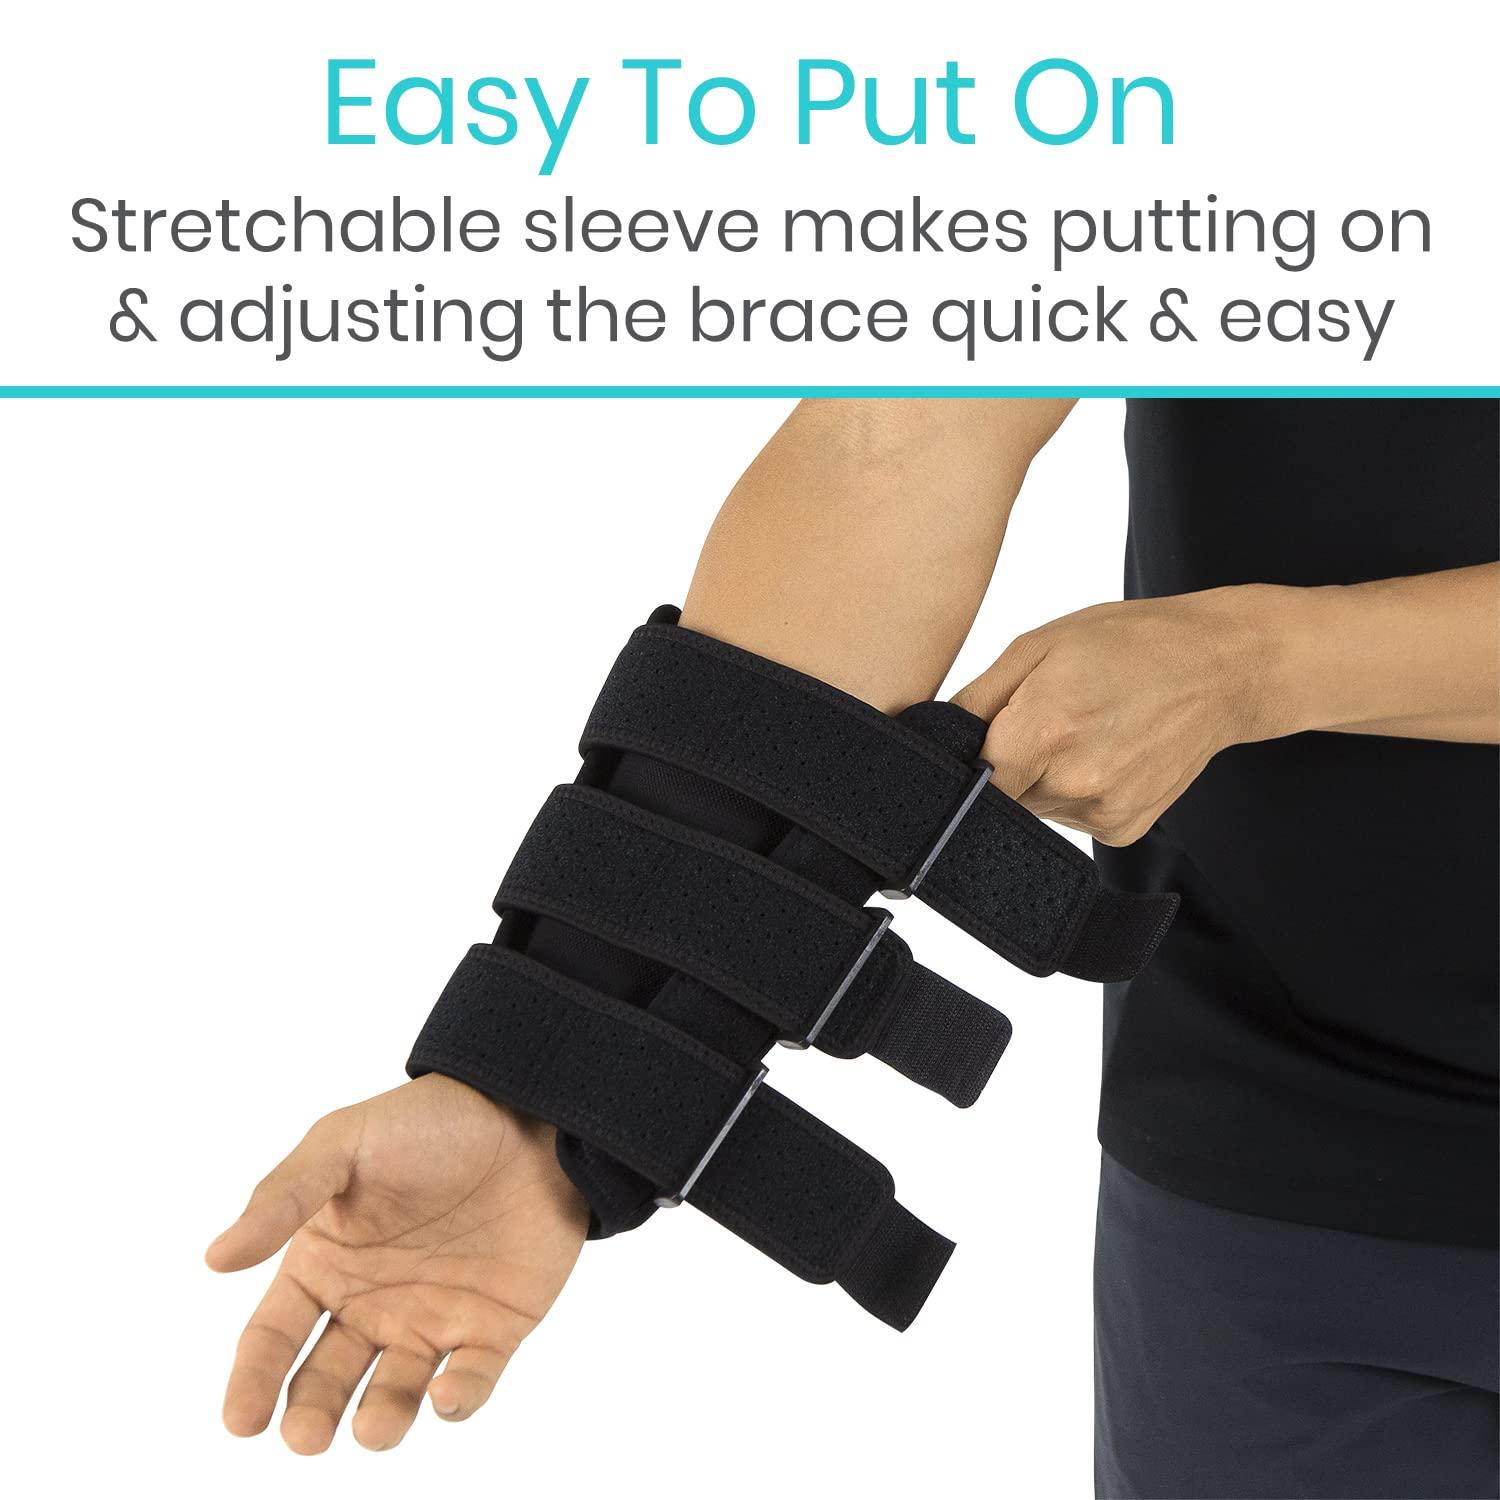 Vive Elbow Splint Brace for Tendonitis, Cubital Tunnel, Sleep Support,  Tennis Elbow - 2 Removeable Splints that Stabilize Joint for Pain Relief -  Arm